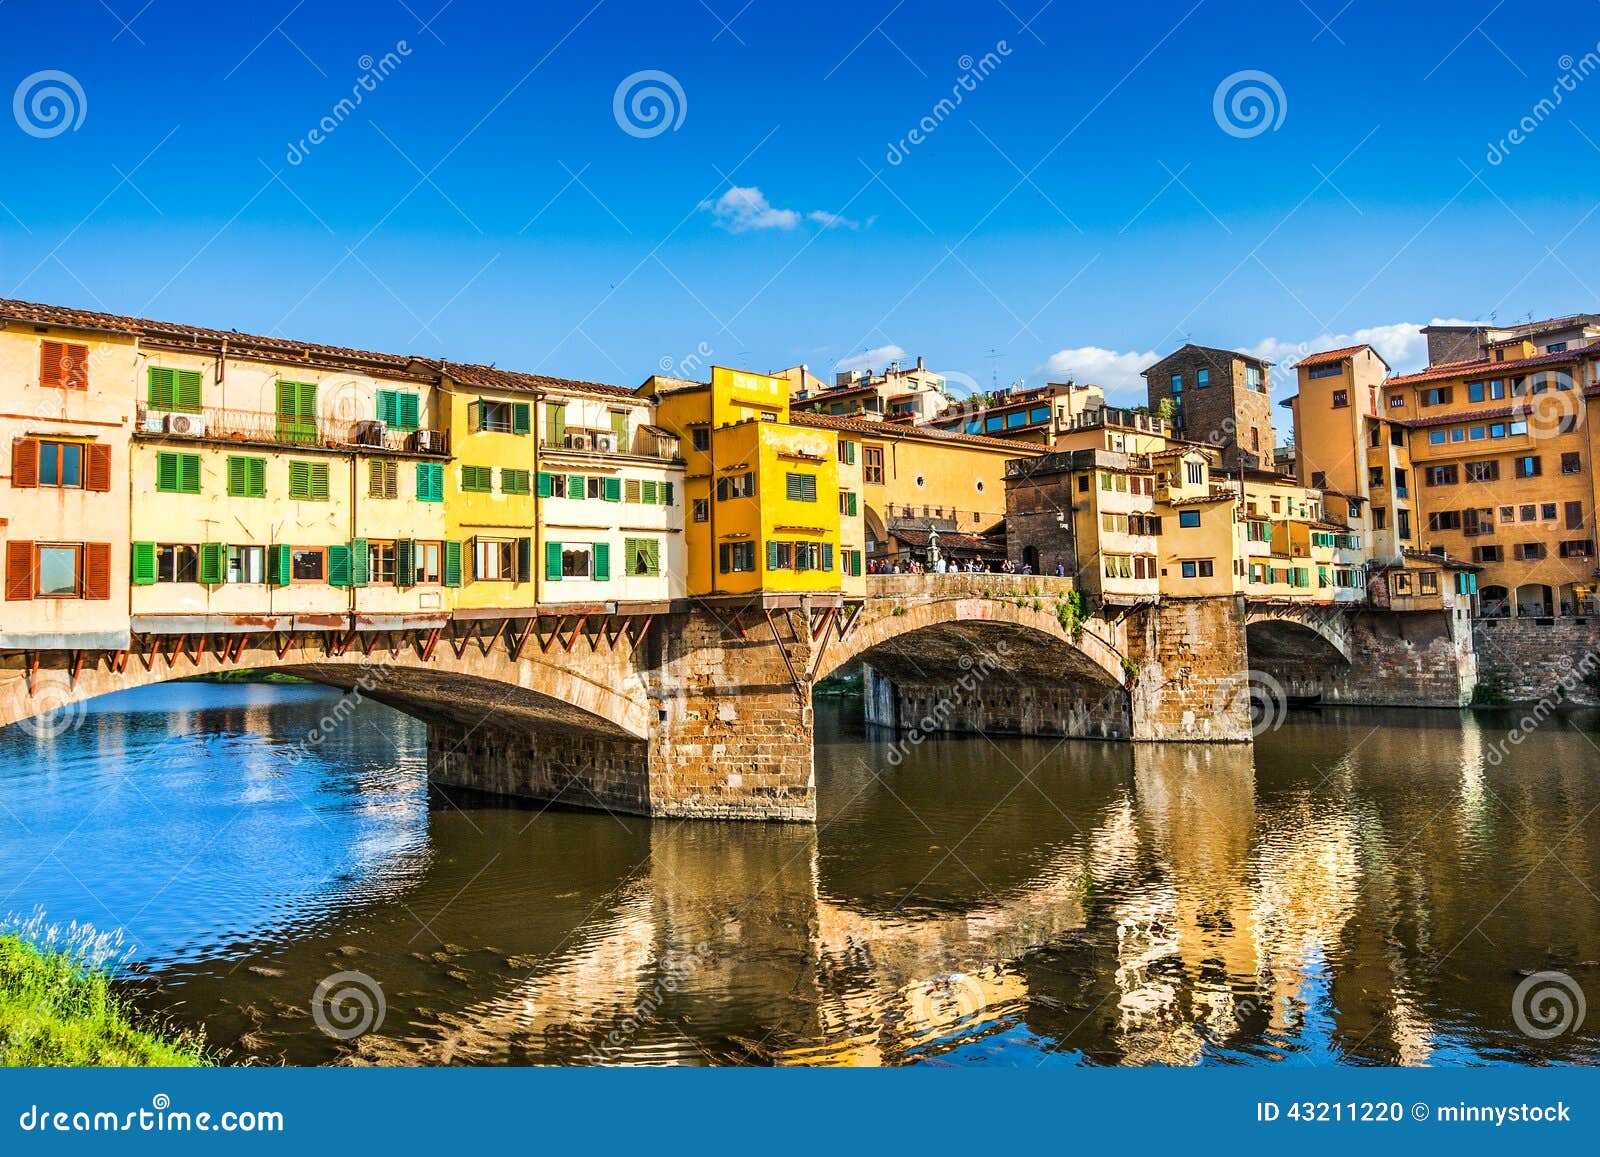 ponte vecchio at sunset in florence, italy